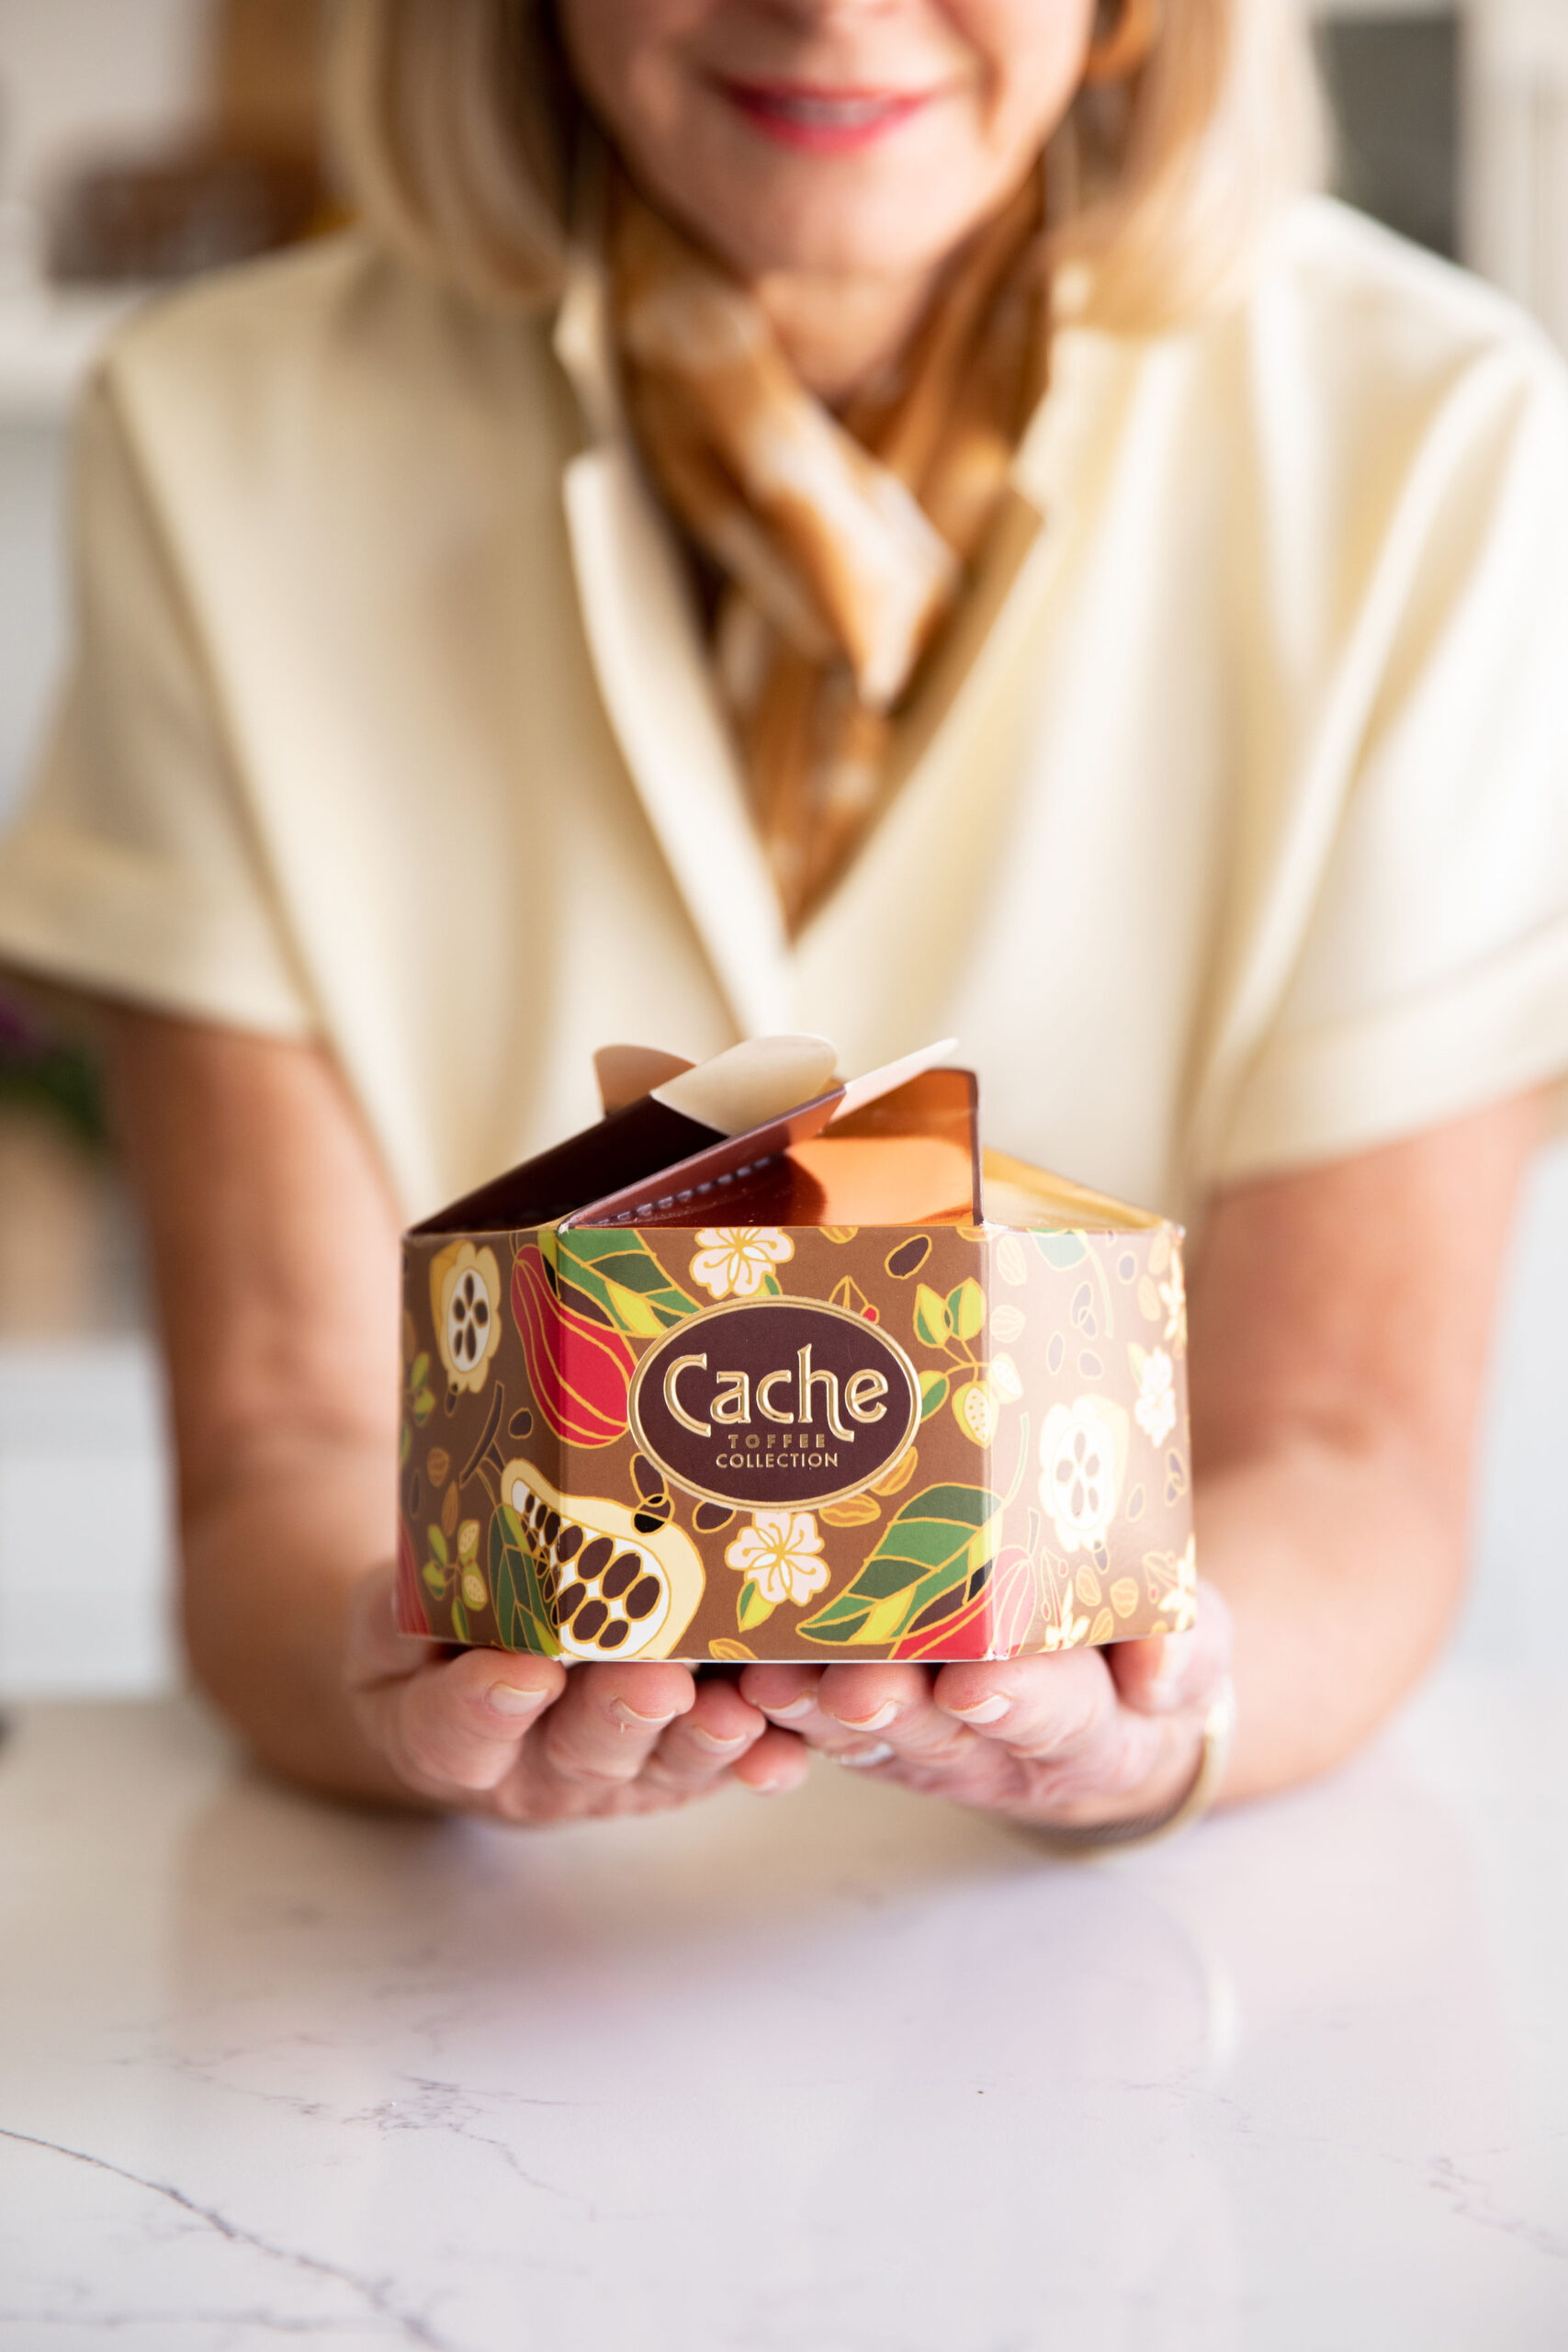 Cache Toffee Collection Case Study by Elle Marketing and Events | Lori Darr with Toffee